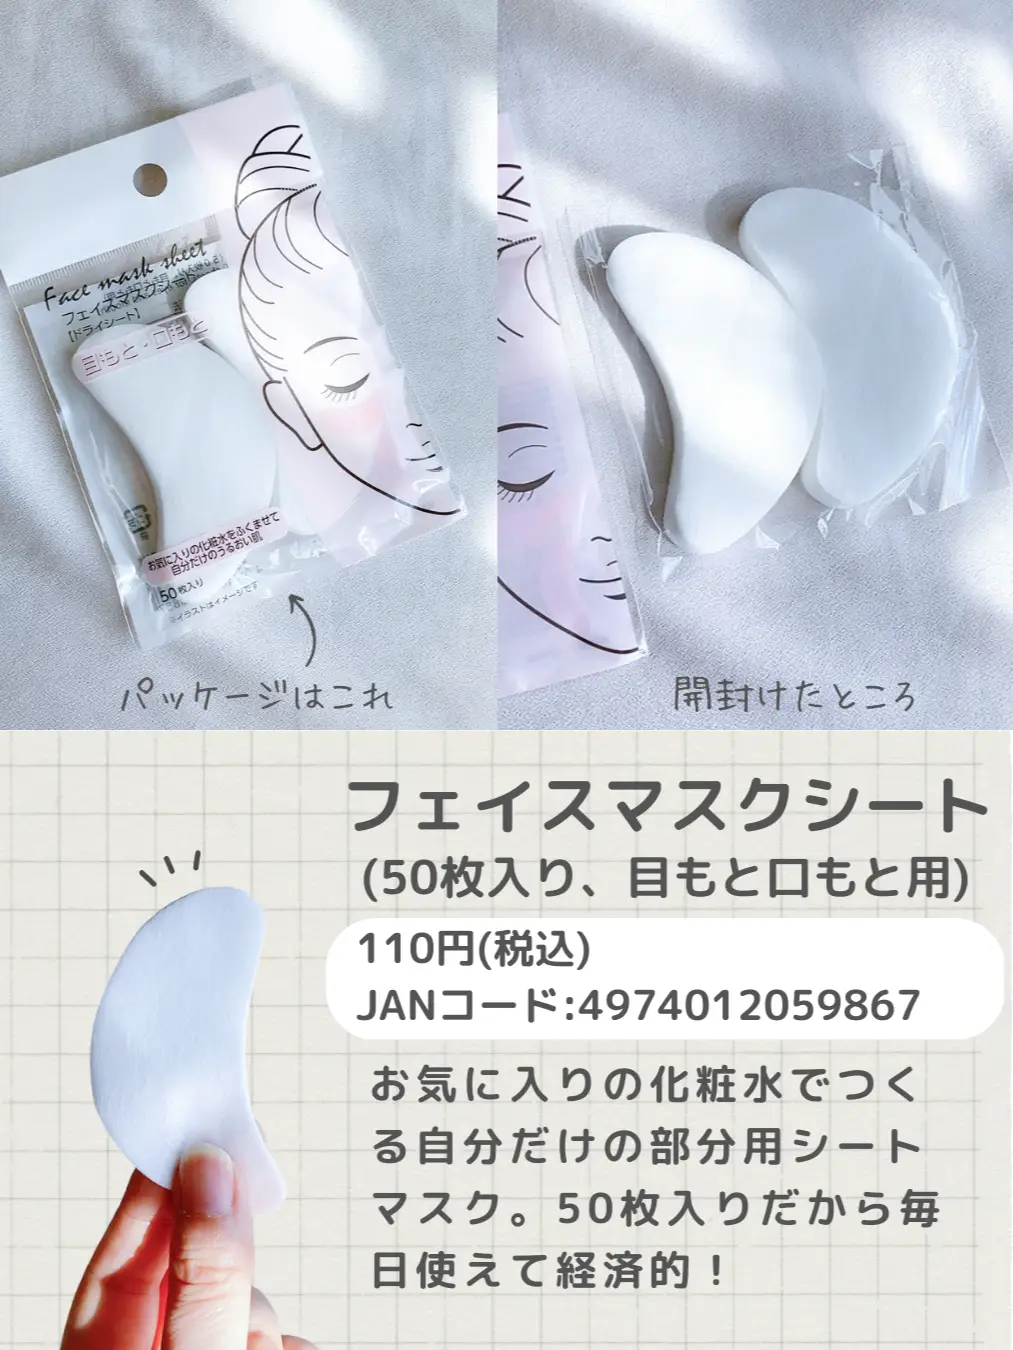 DAISO] Partial face mask sheet made with your favorite lotion, Gallery  posted by ak